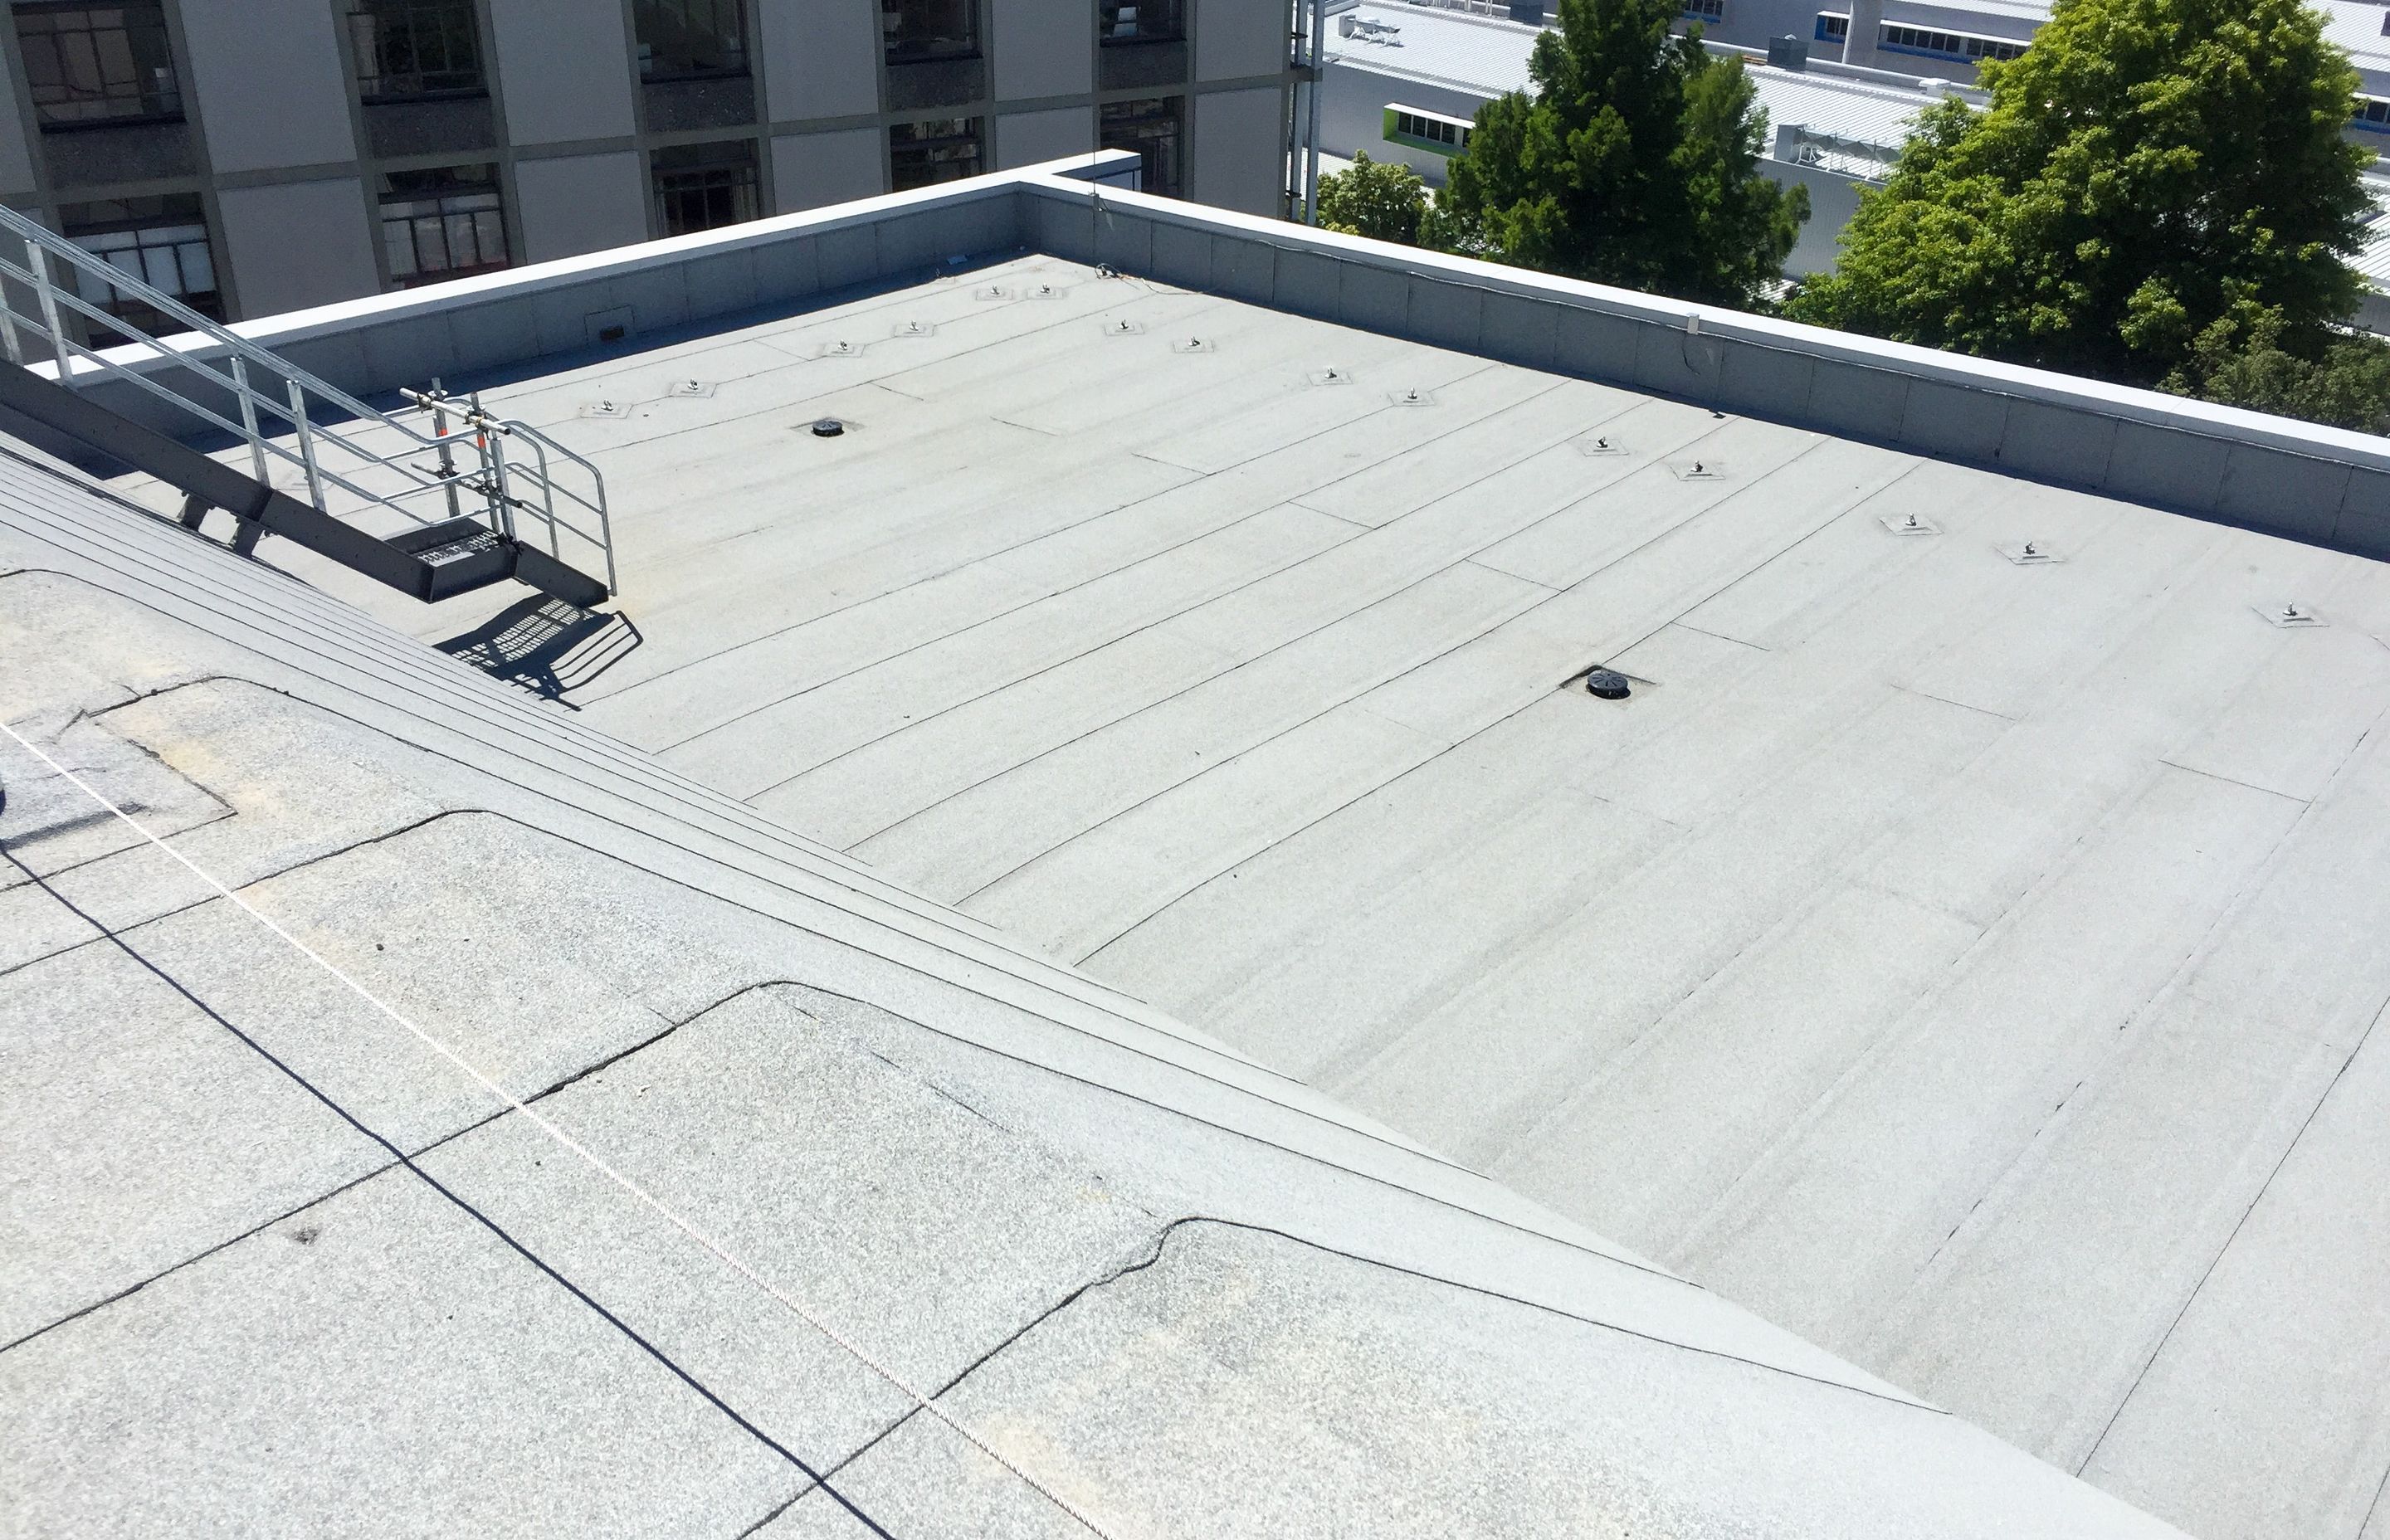 The Rutherford Regional Science and Innovation Centre (RRSIC) at the University of Canterbury features the Soprema DuOtherm Warm Roof System.